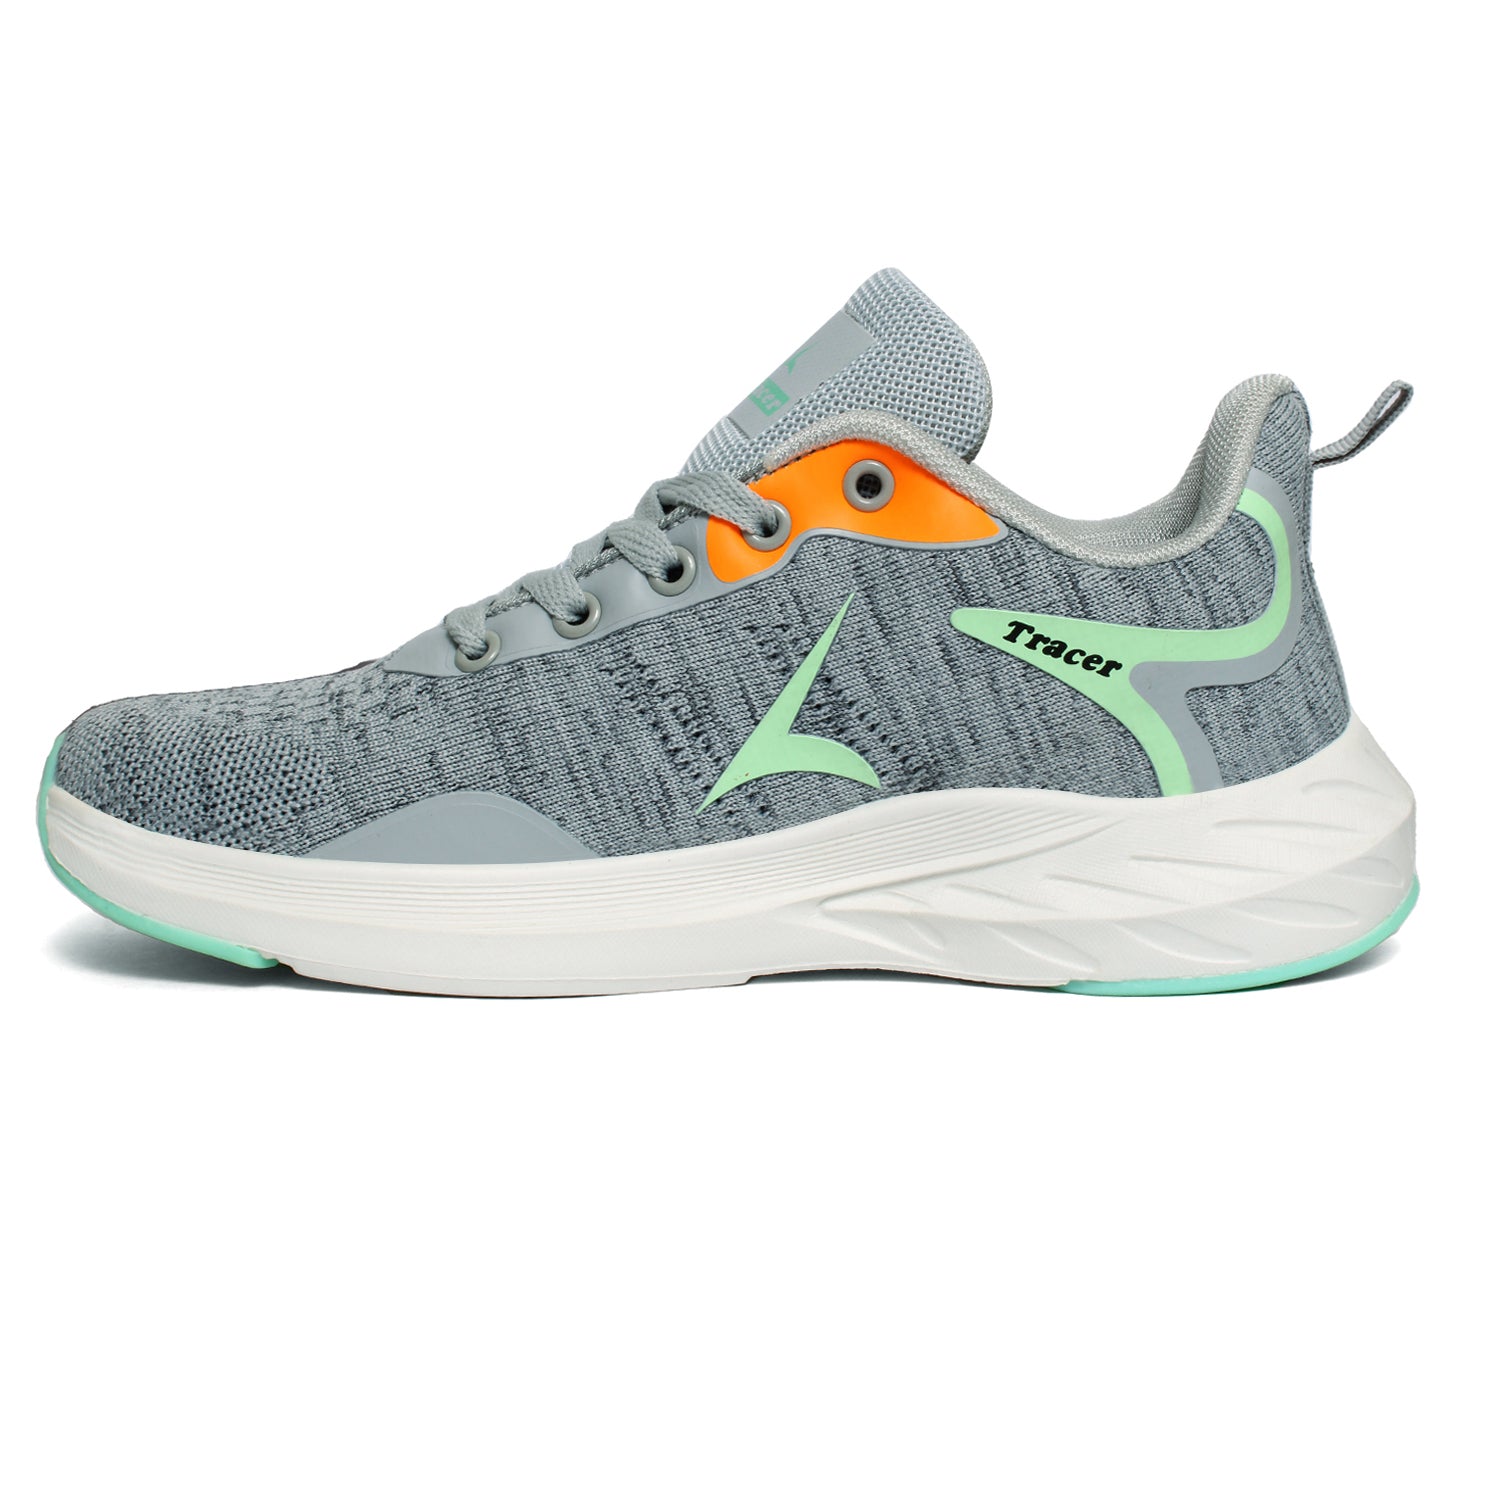 Tracer India Aurora-L-2237 Sneakers for Women's Grey